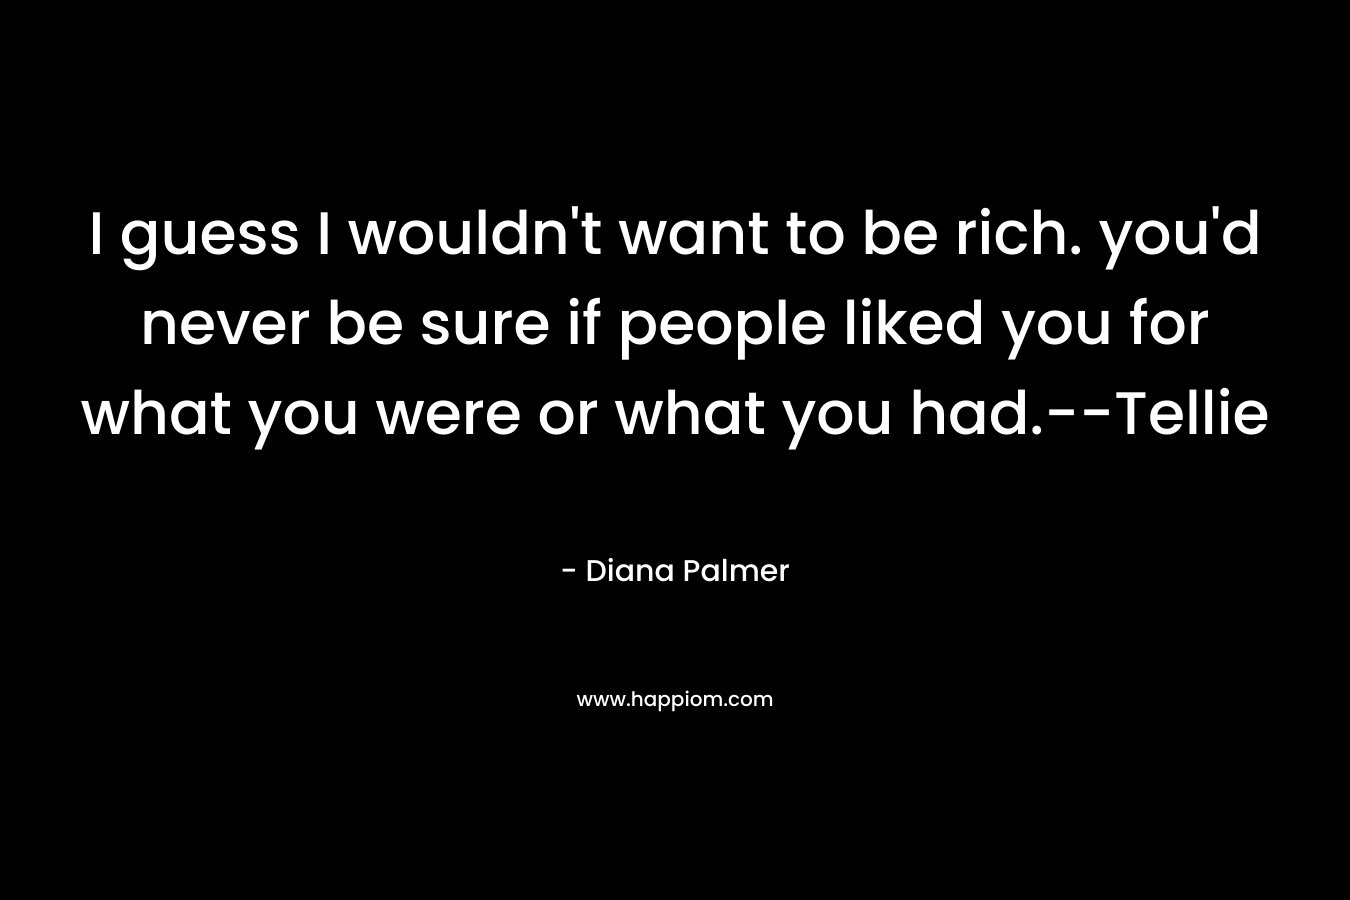 I guess I wouldn't want to be rich. you'd never be sure if people liked you for what you were or what you had.--Tellie